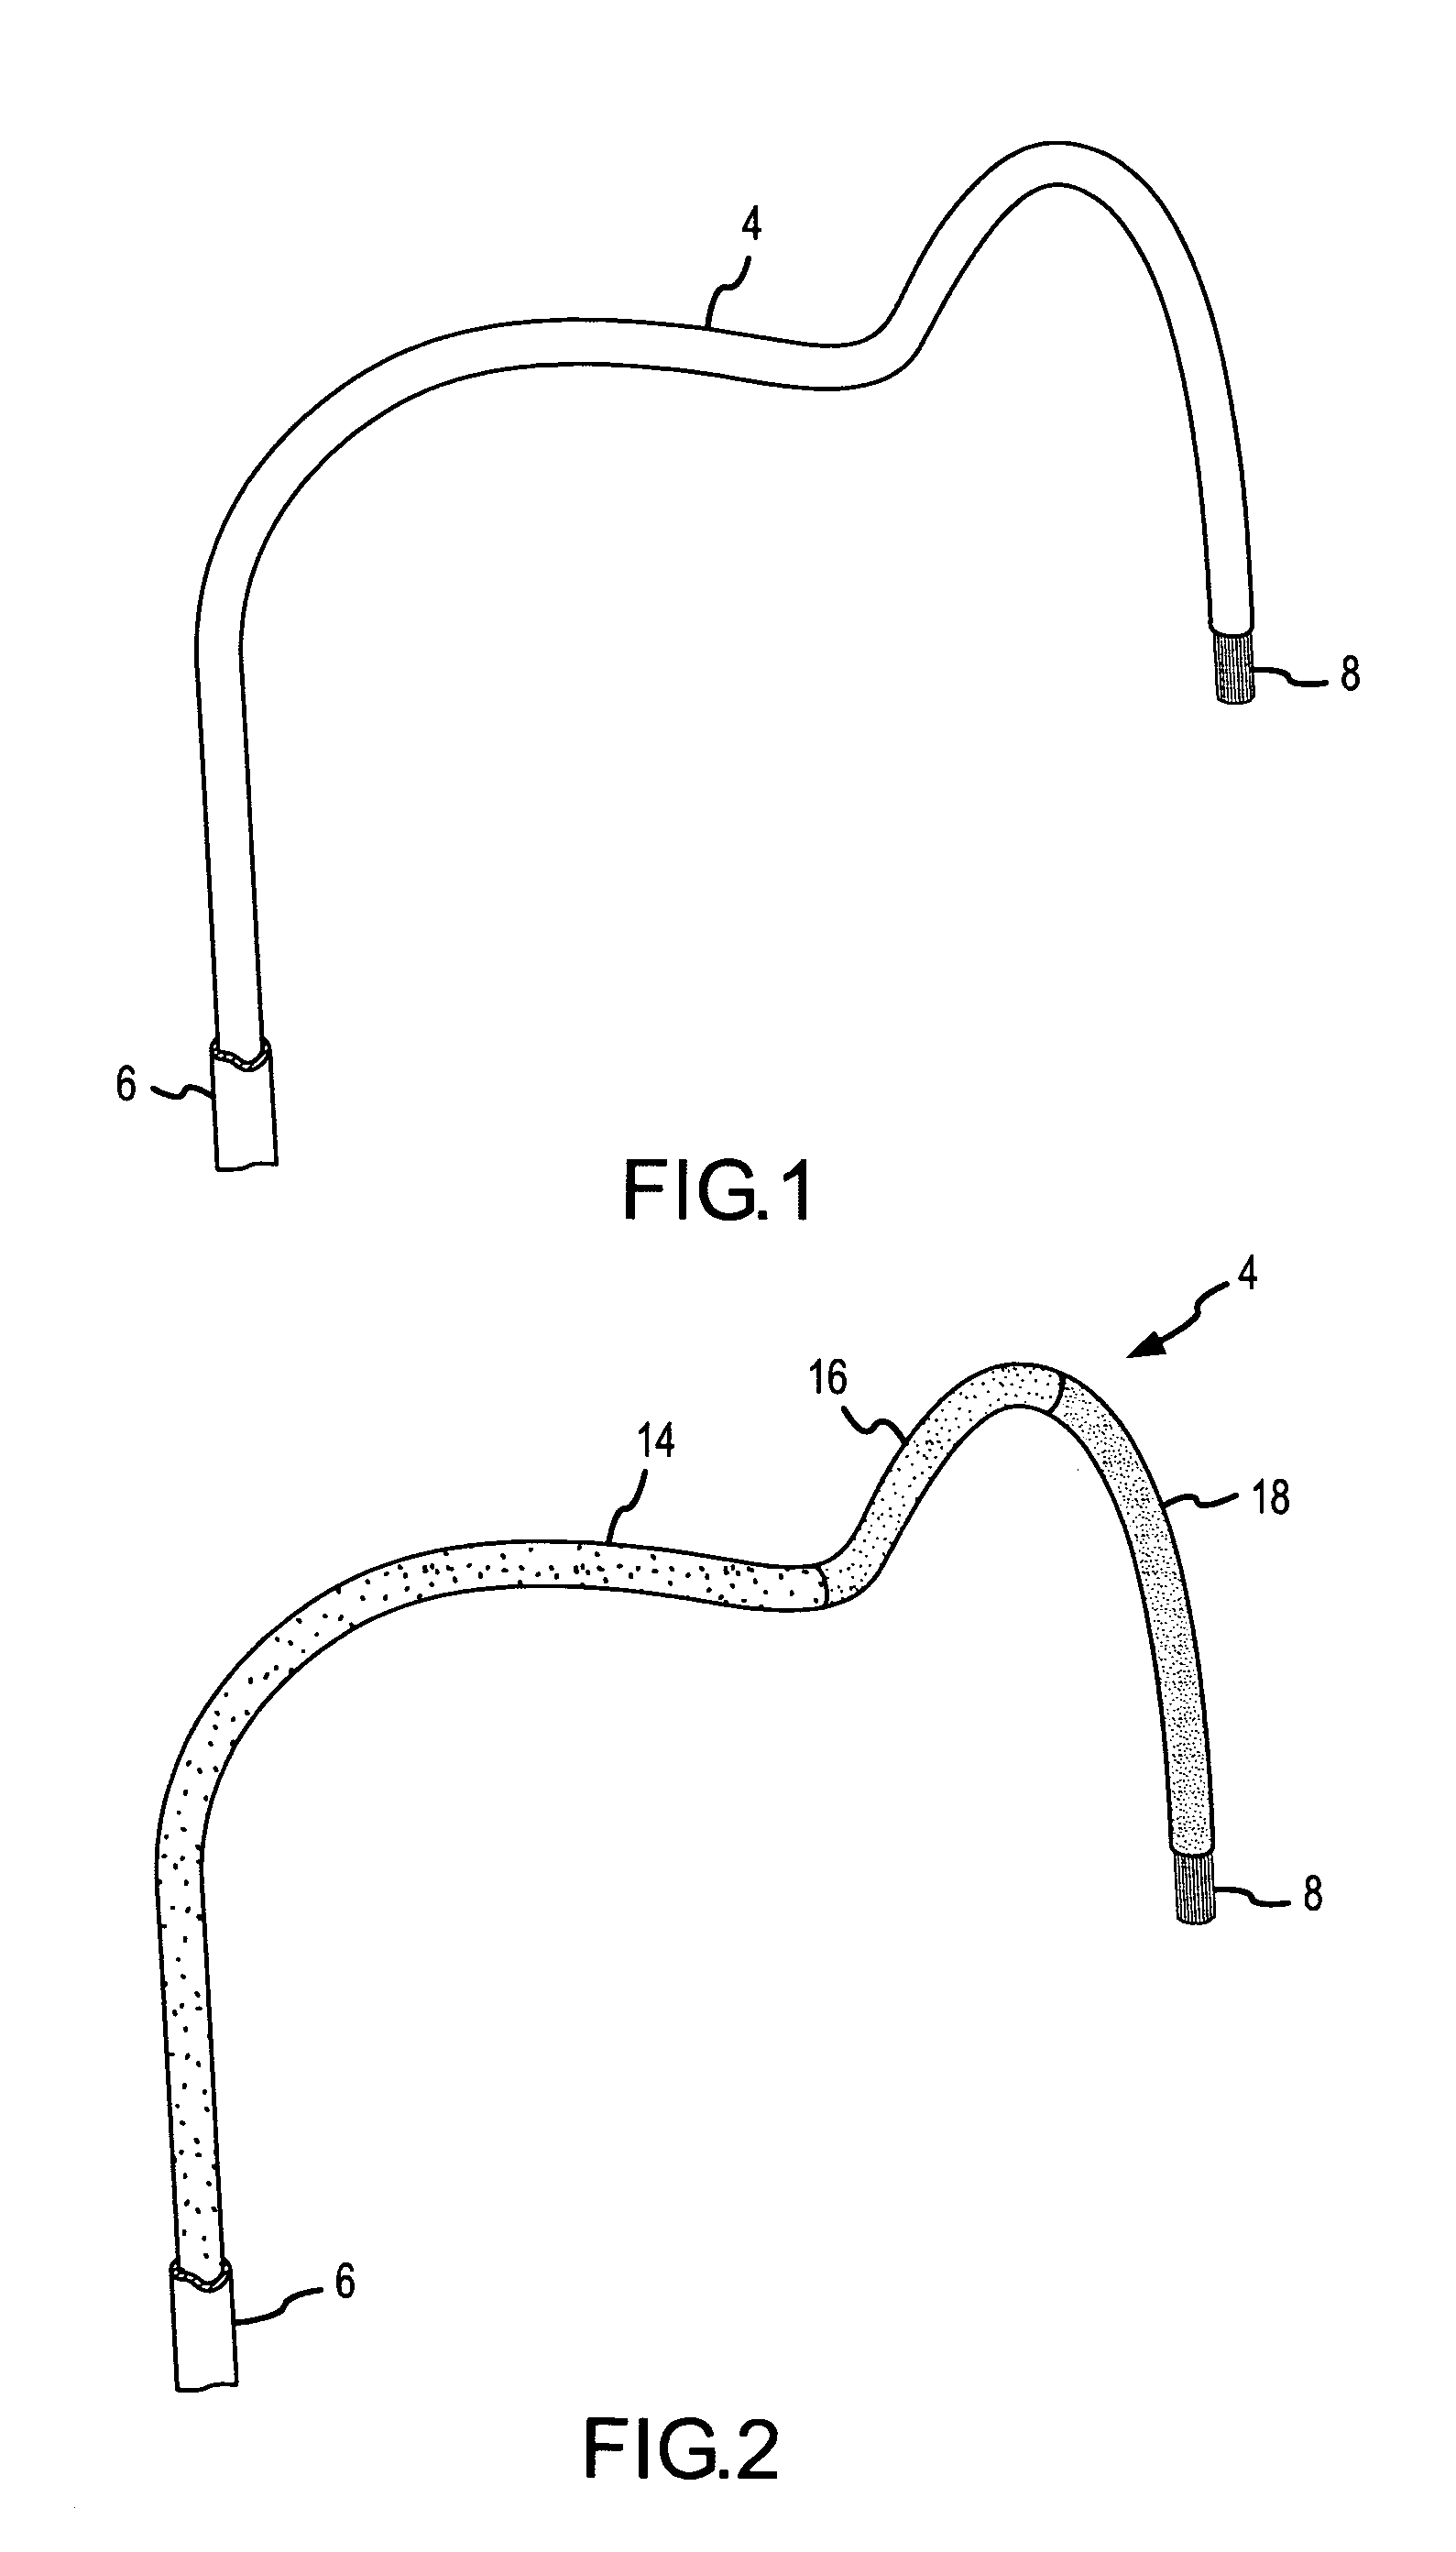 Ablation catheter with suspension system incorporating rigid and flexible components